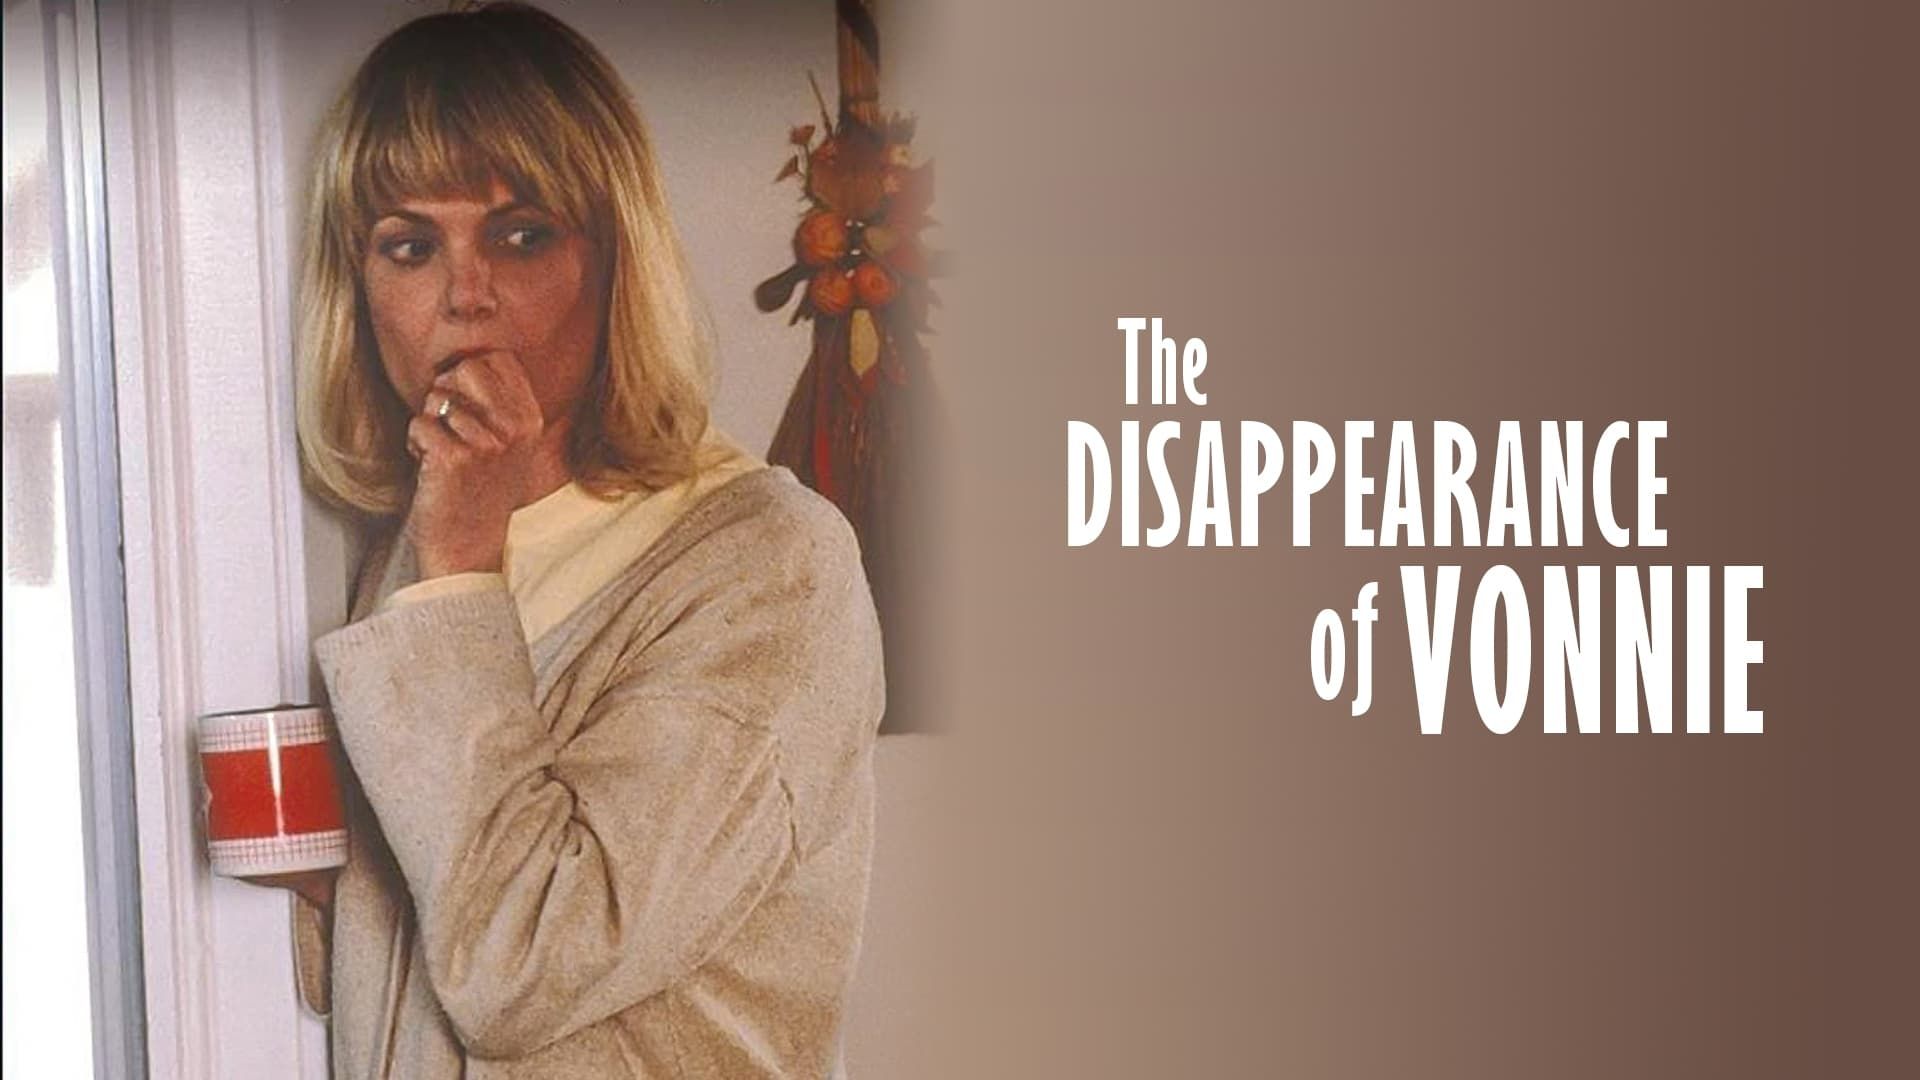 The Disappearance of Vonnie background